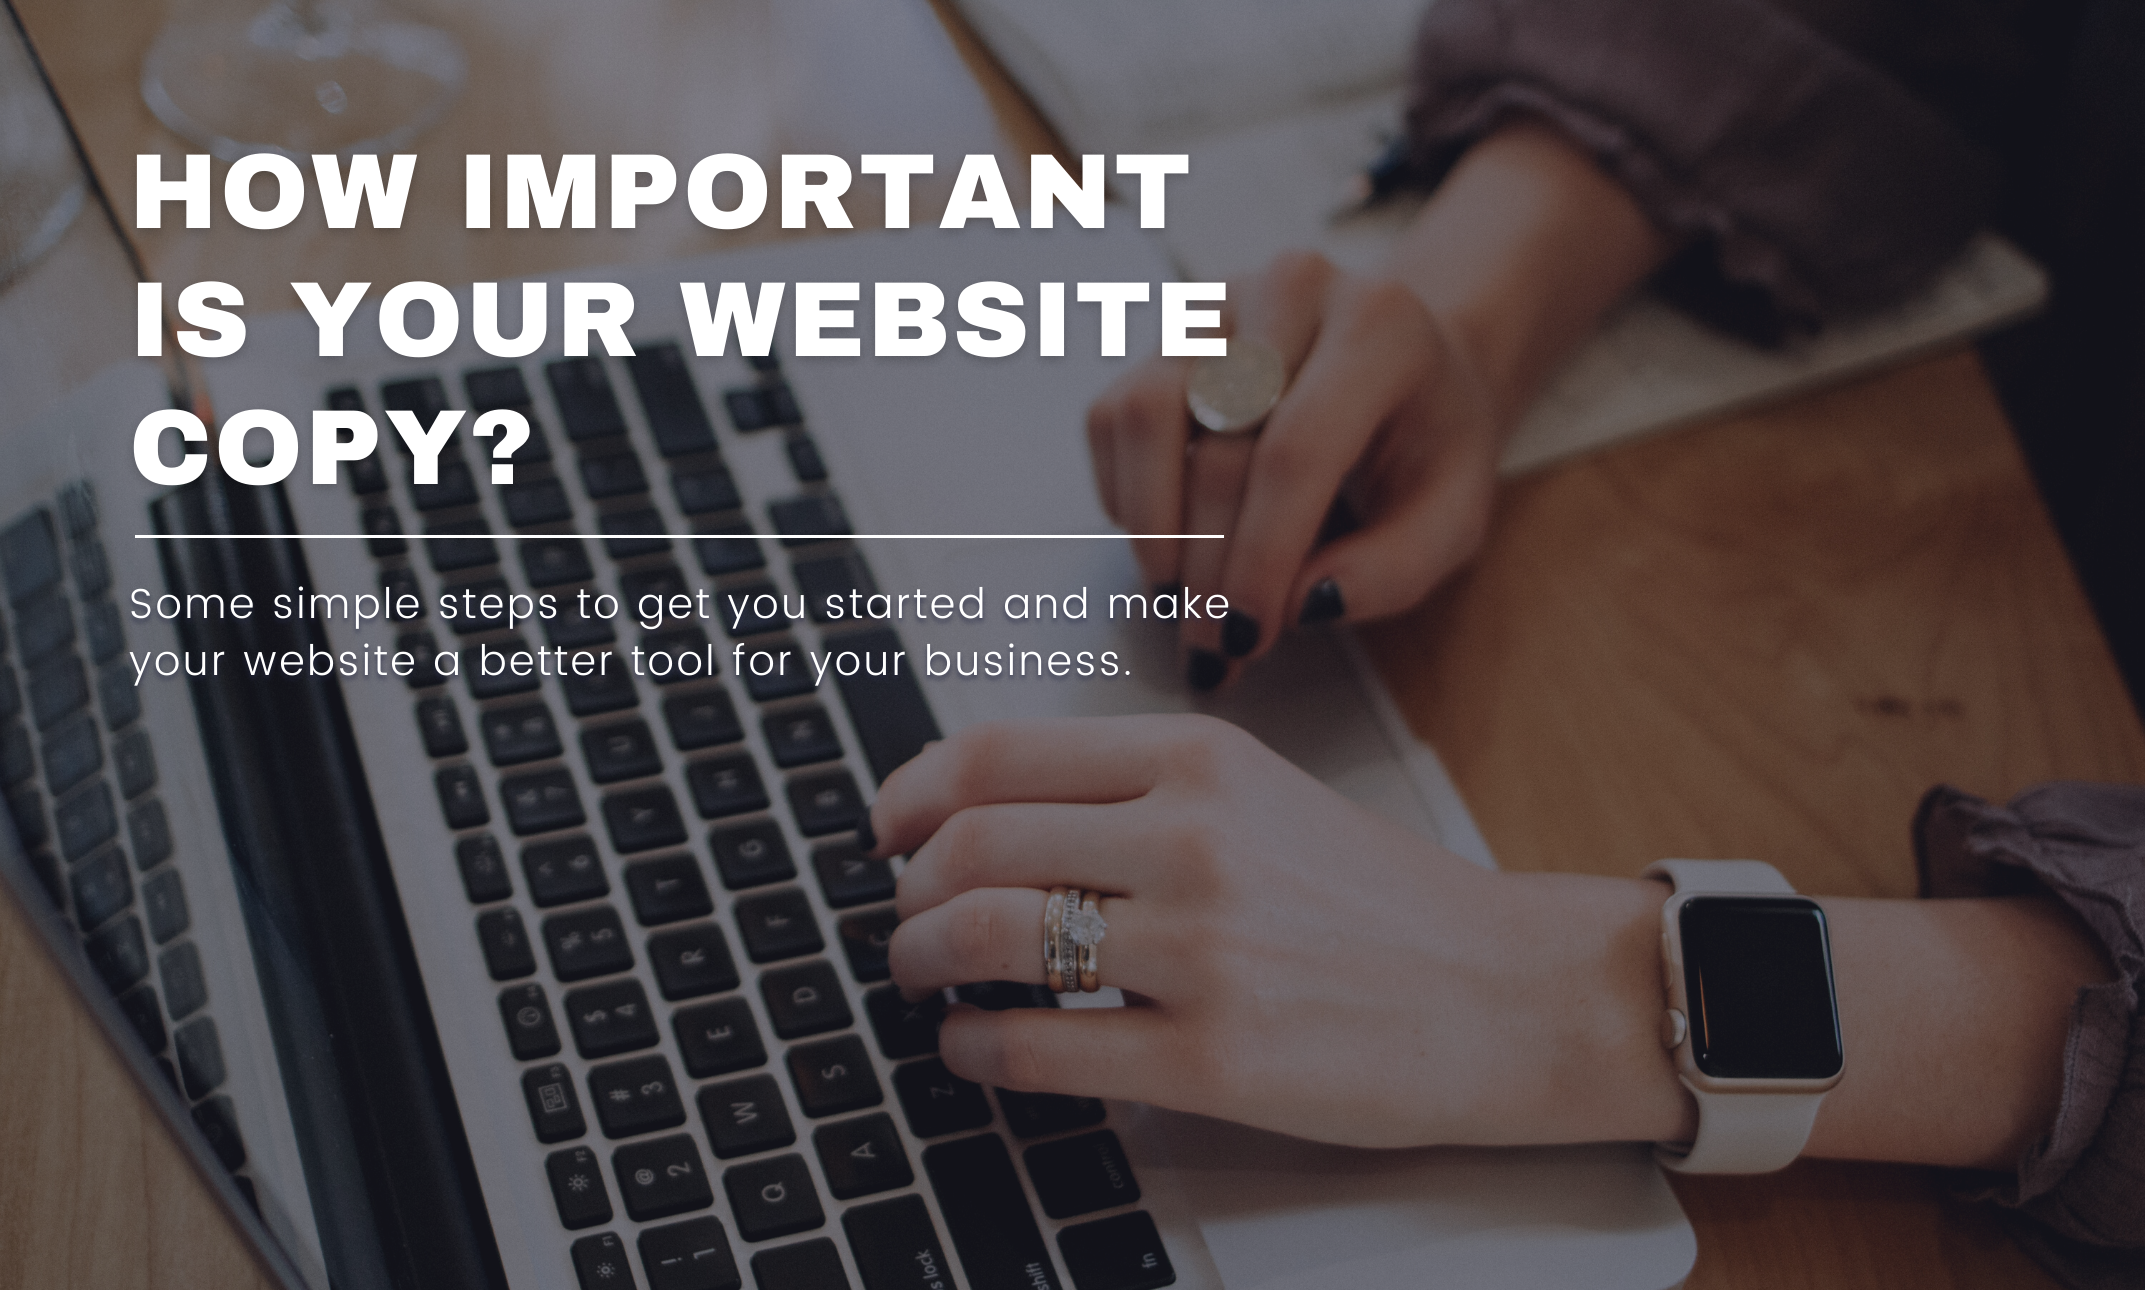 How important is your website copy